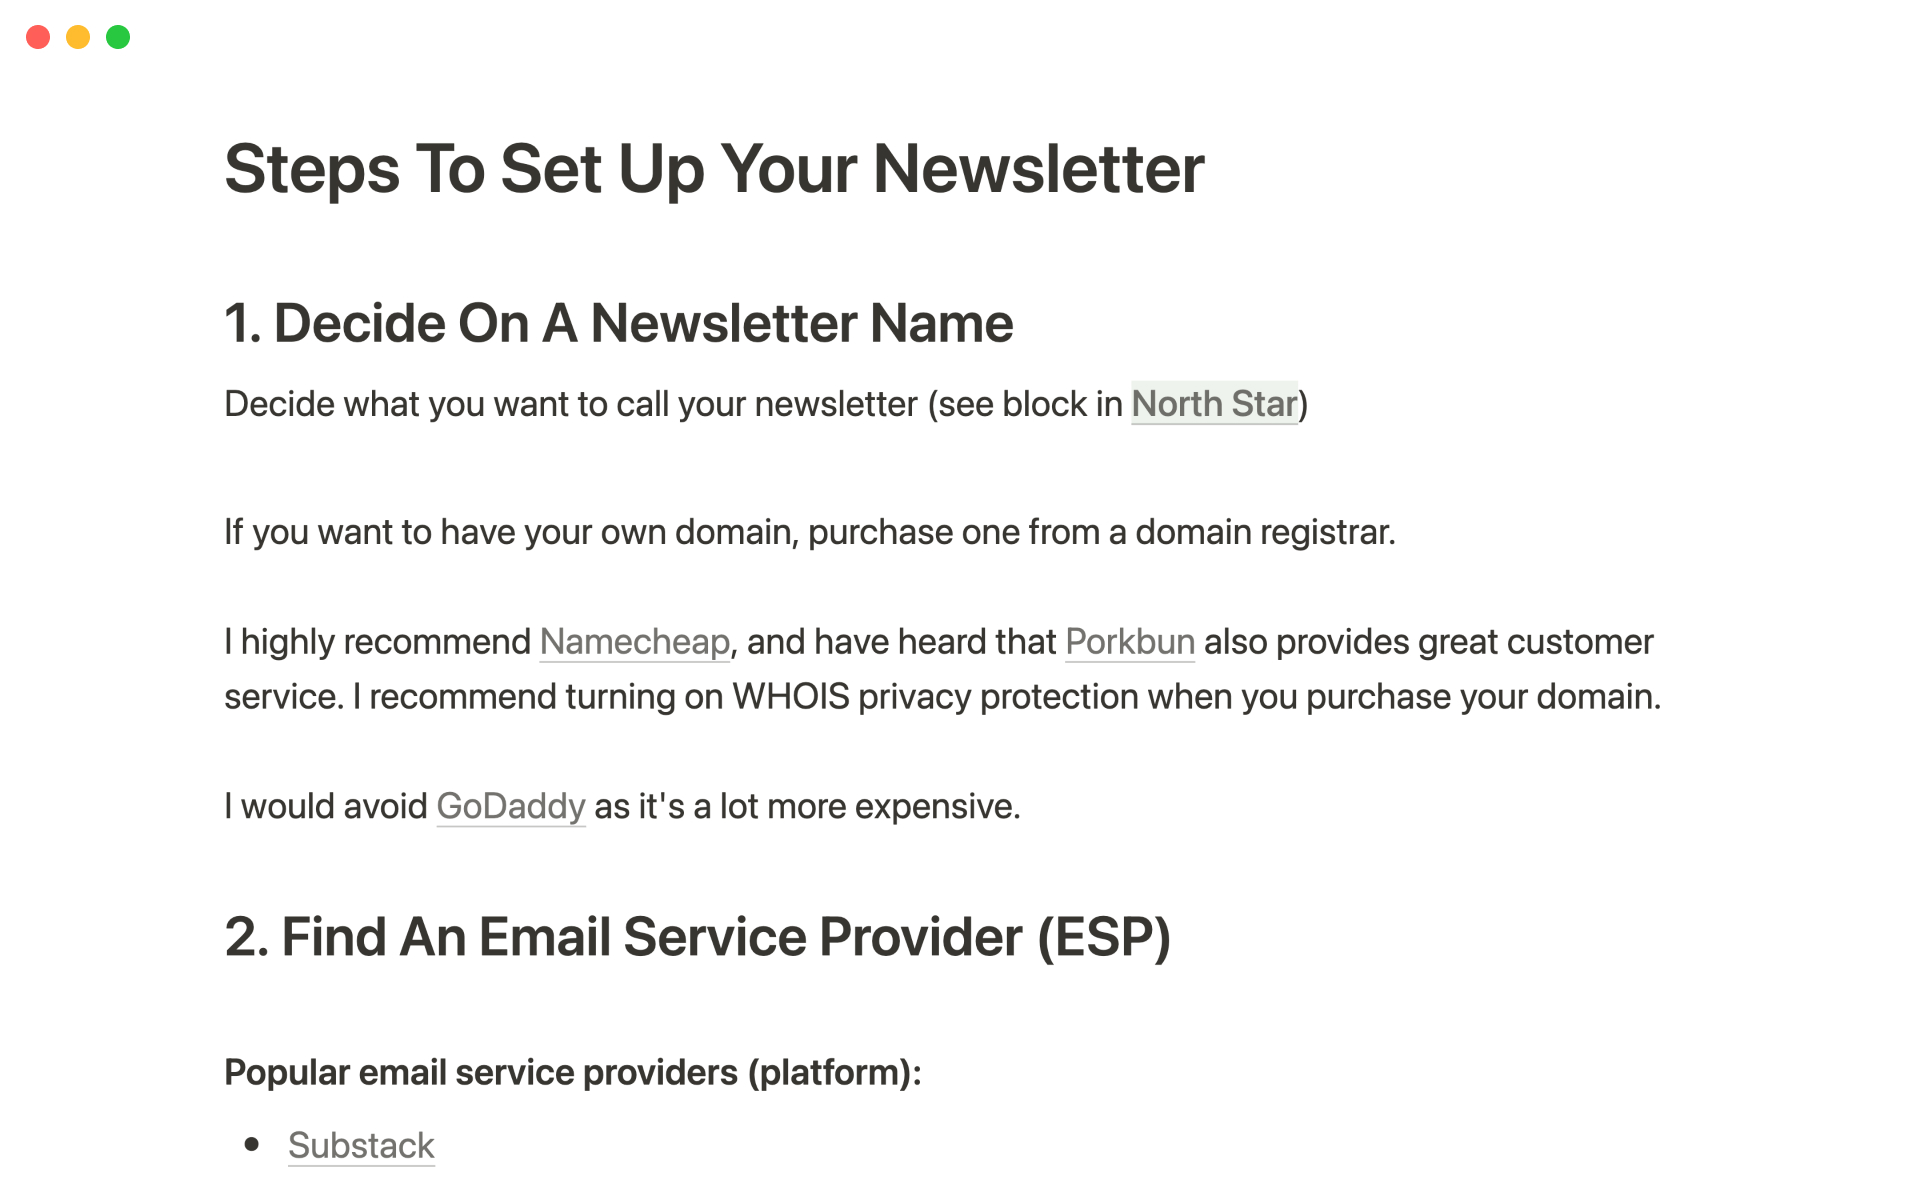 Get better at writing, growing and monetizing your newsletter.